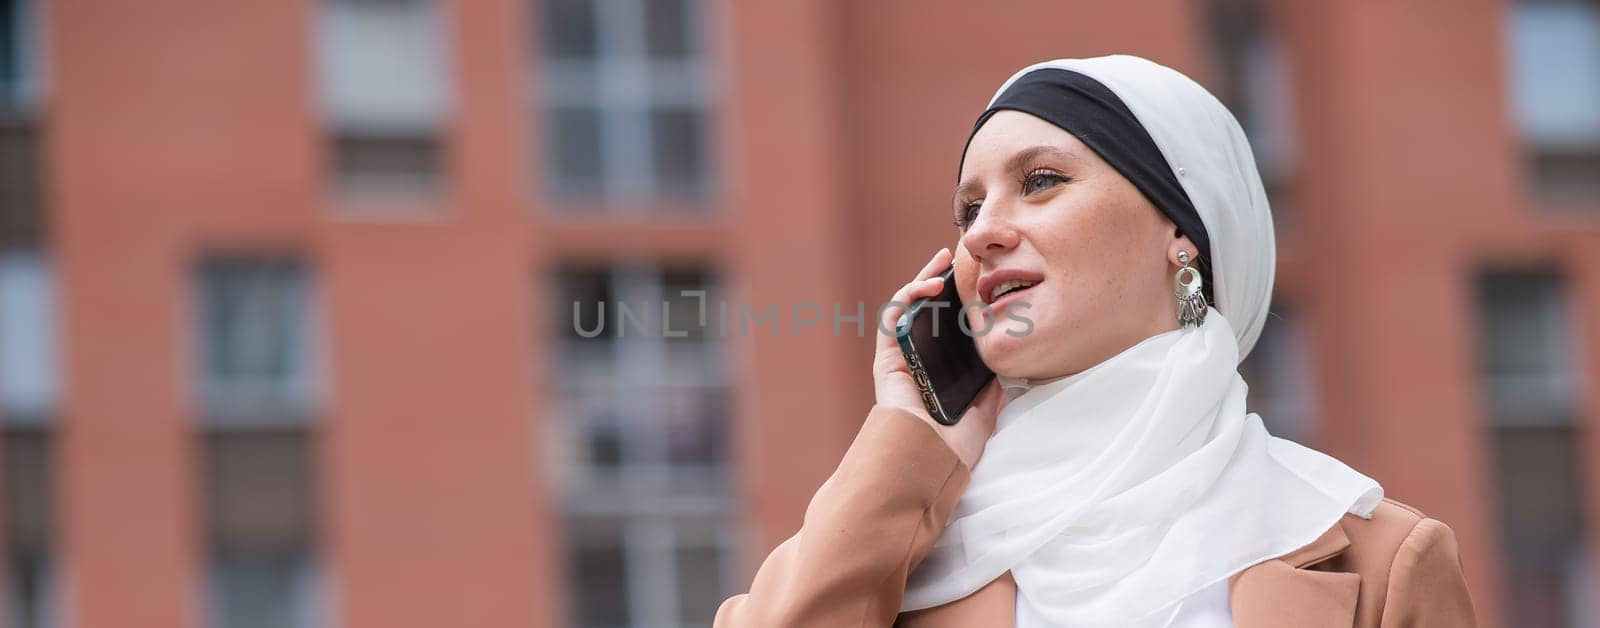 Young woman in hijab talking on smartphone outdoors. Widescreen